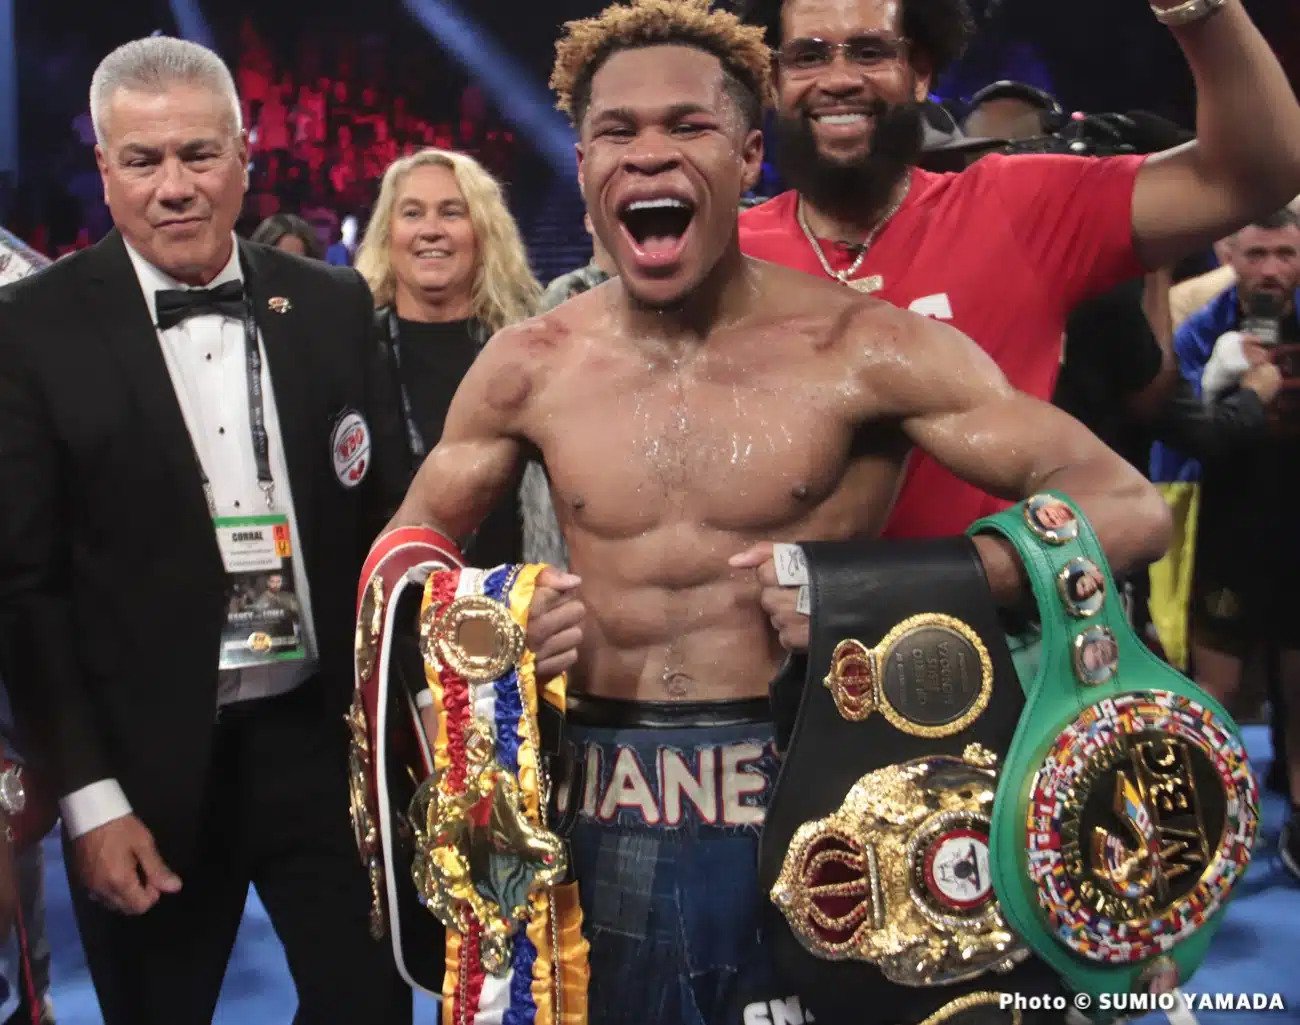 Devin Haney Interested In Prograis Fight, Contacted Hearn About It